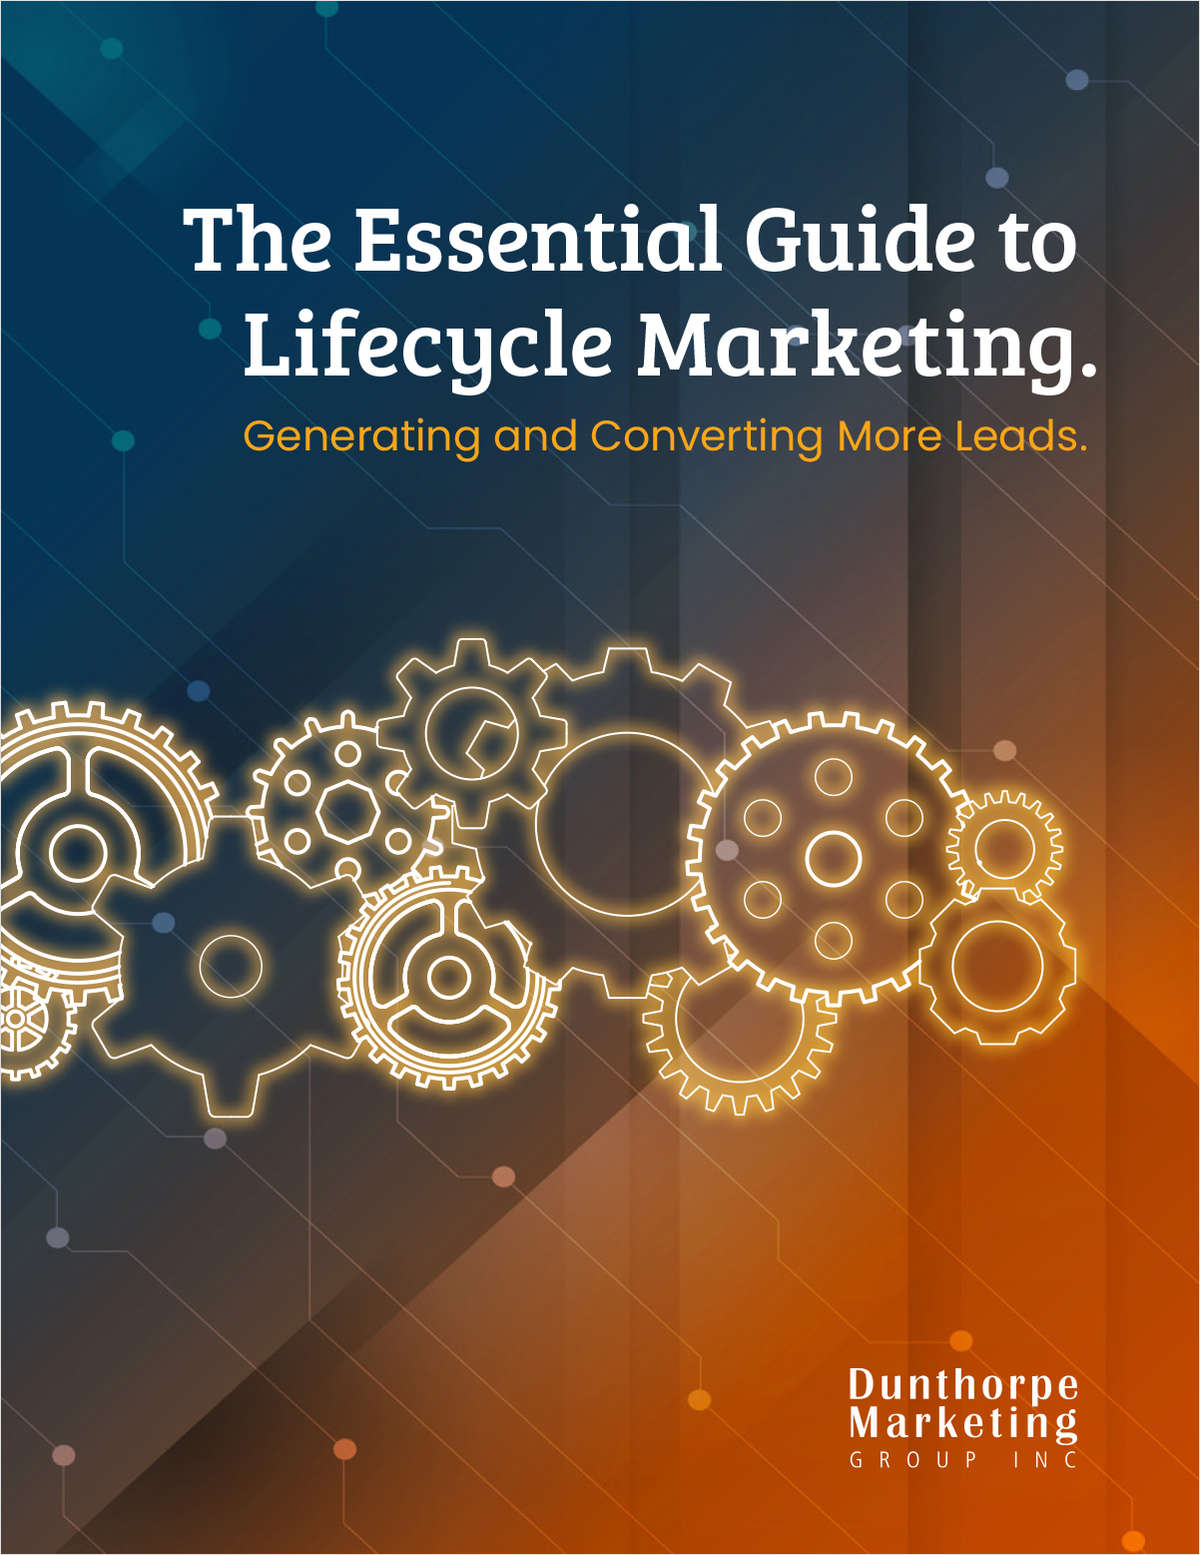 The Essential Guide to Lifecycle Marketing.